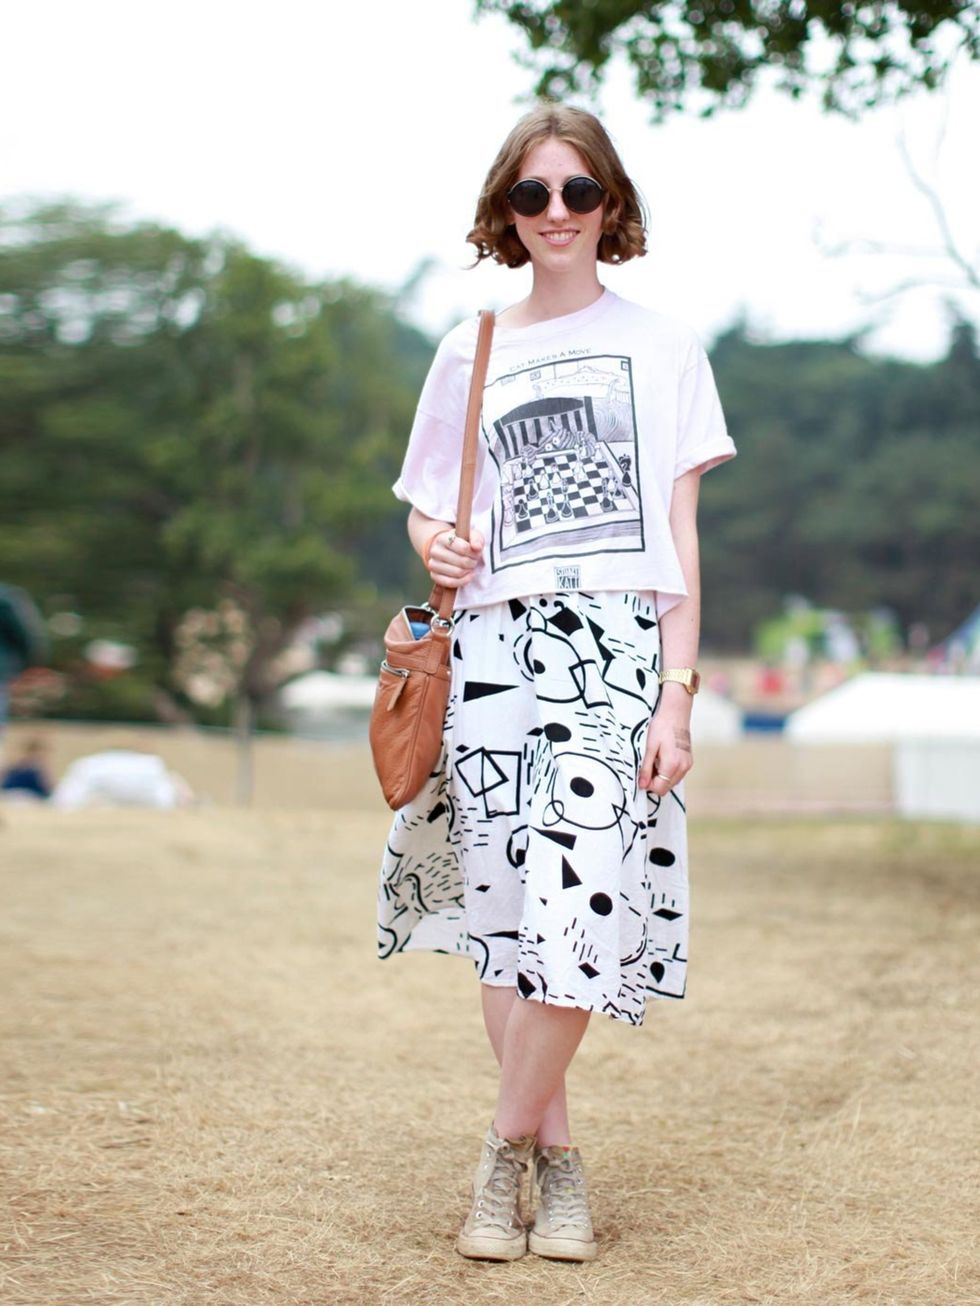 <p>Hanna Banks wears vintage t-shirt, Urban Outfitters skirt, with her Mum's bag and vintage sunglasses.</p>